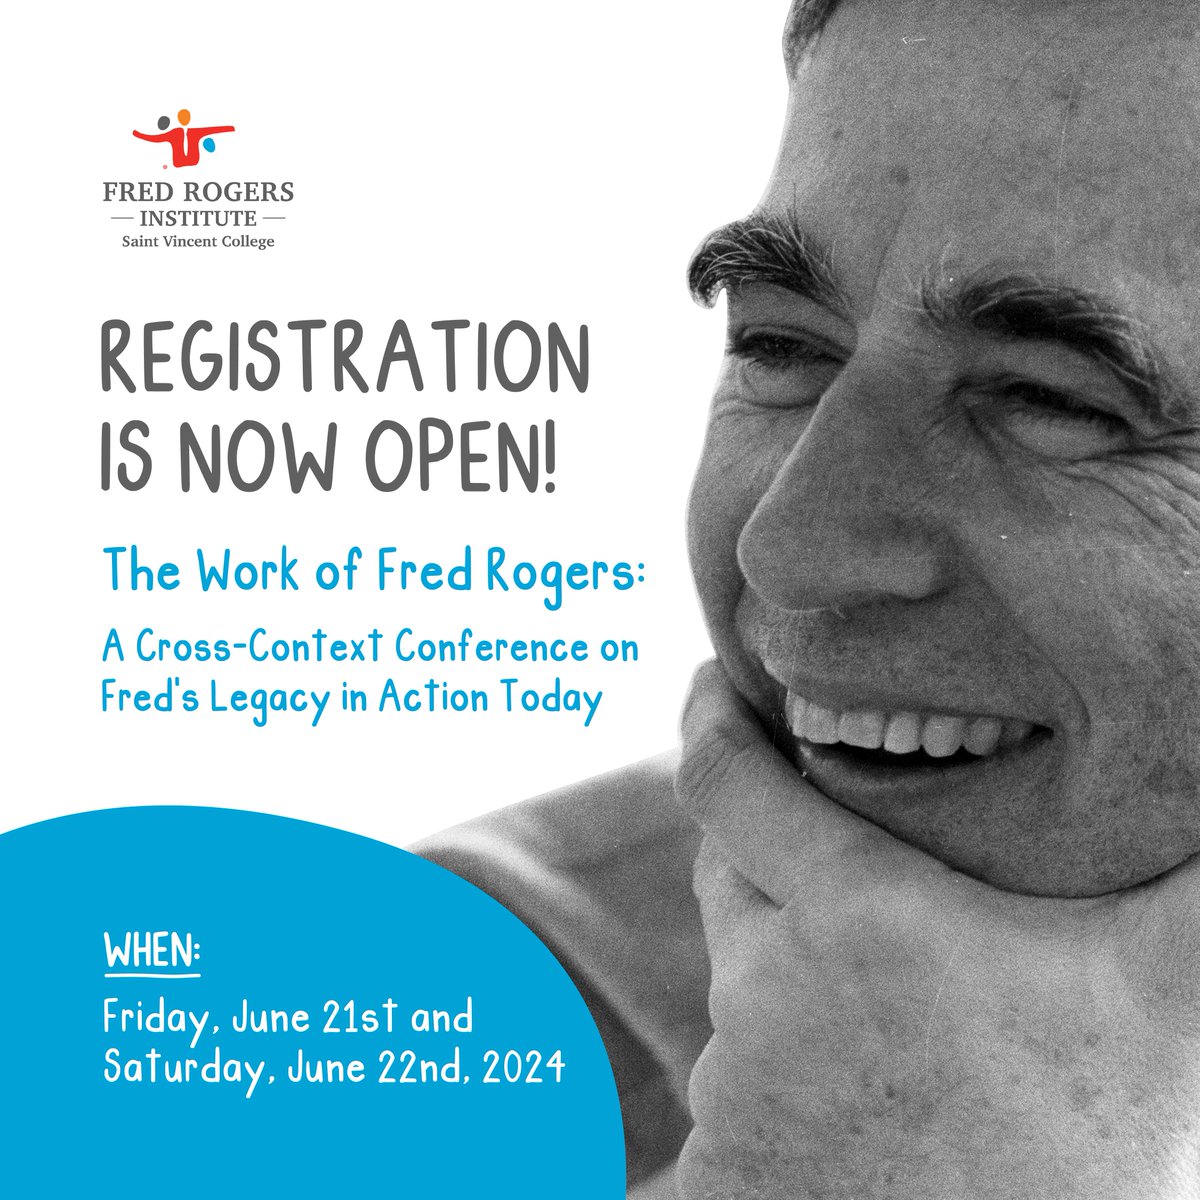 The Fred Rogers Institute is thrilled to announce that registration is now OPEN for its highly anticipated second annual Work of Fred Rogers Conference, from June 21st to June 22nd, 2024. For more details please visit our website: fredrogersinstitute.org/the-work-of-fr…